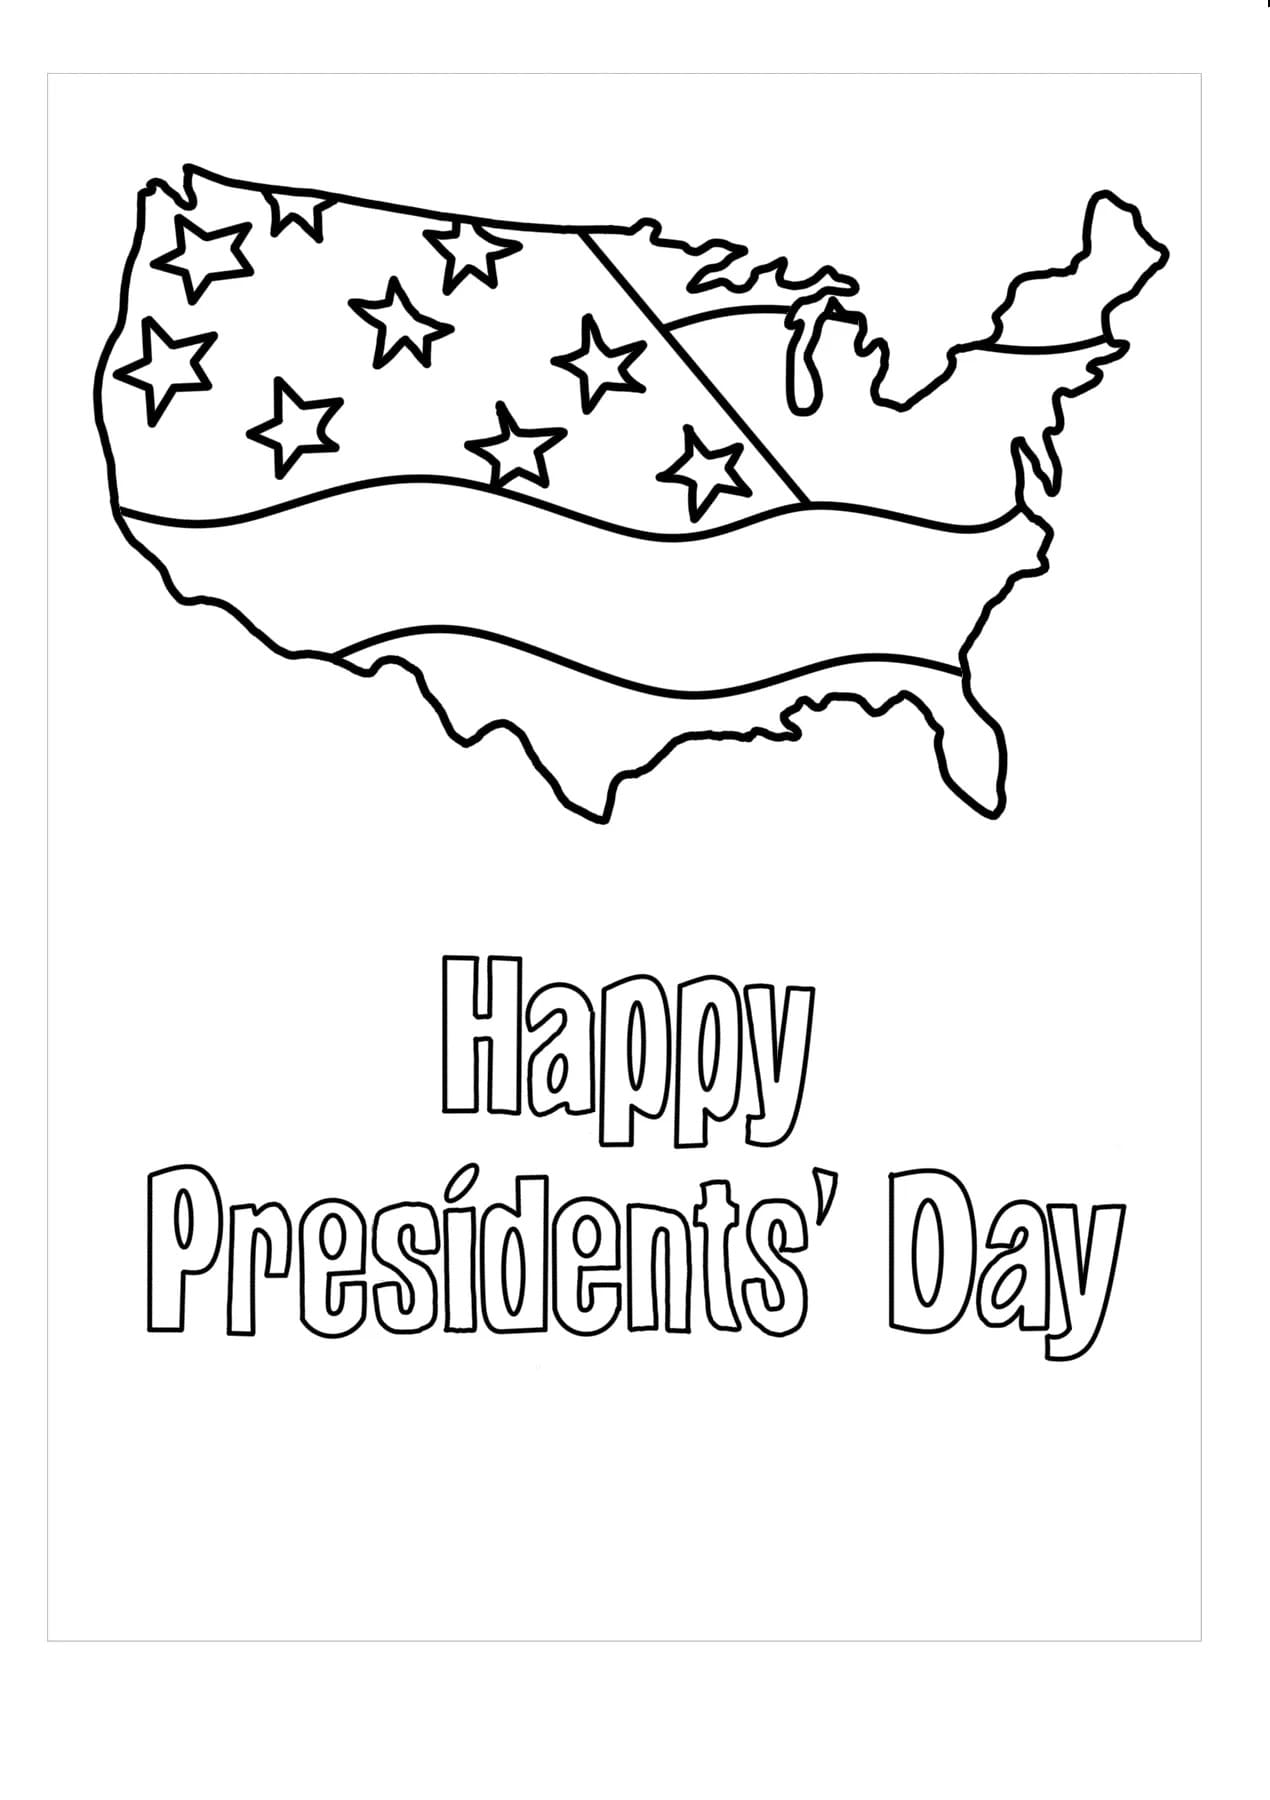 President's Day Coloring Pages for Kids 67